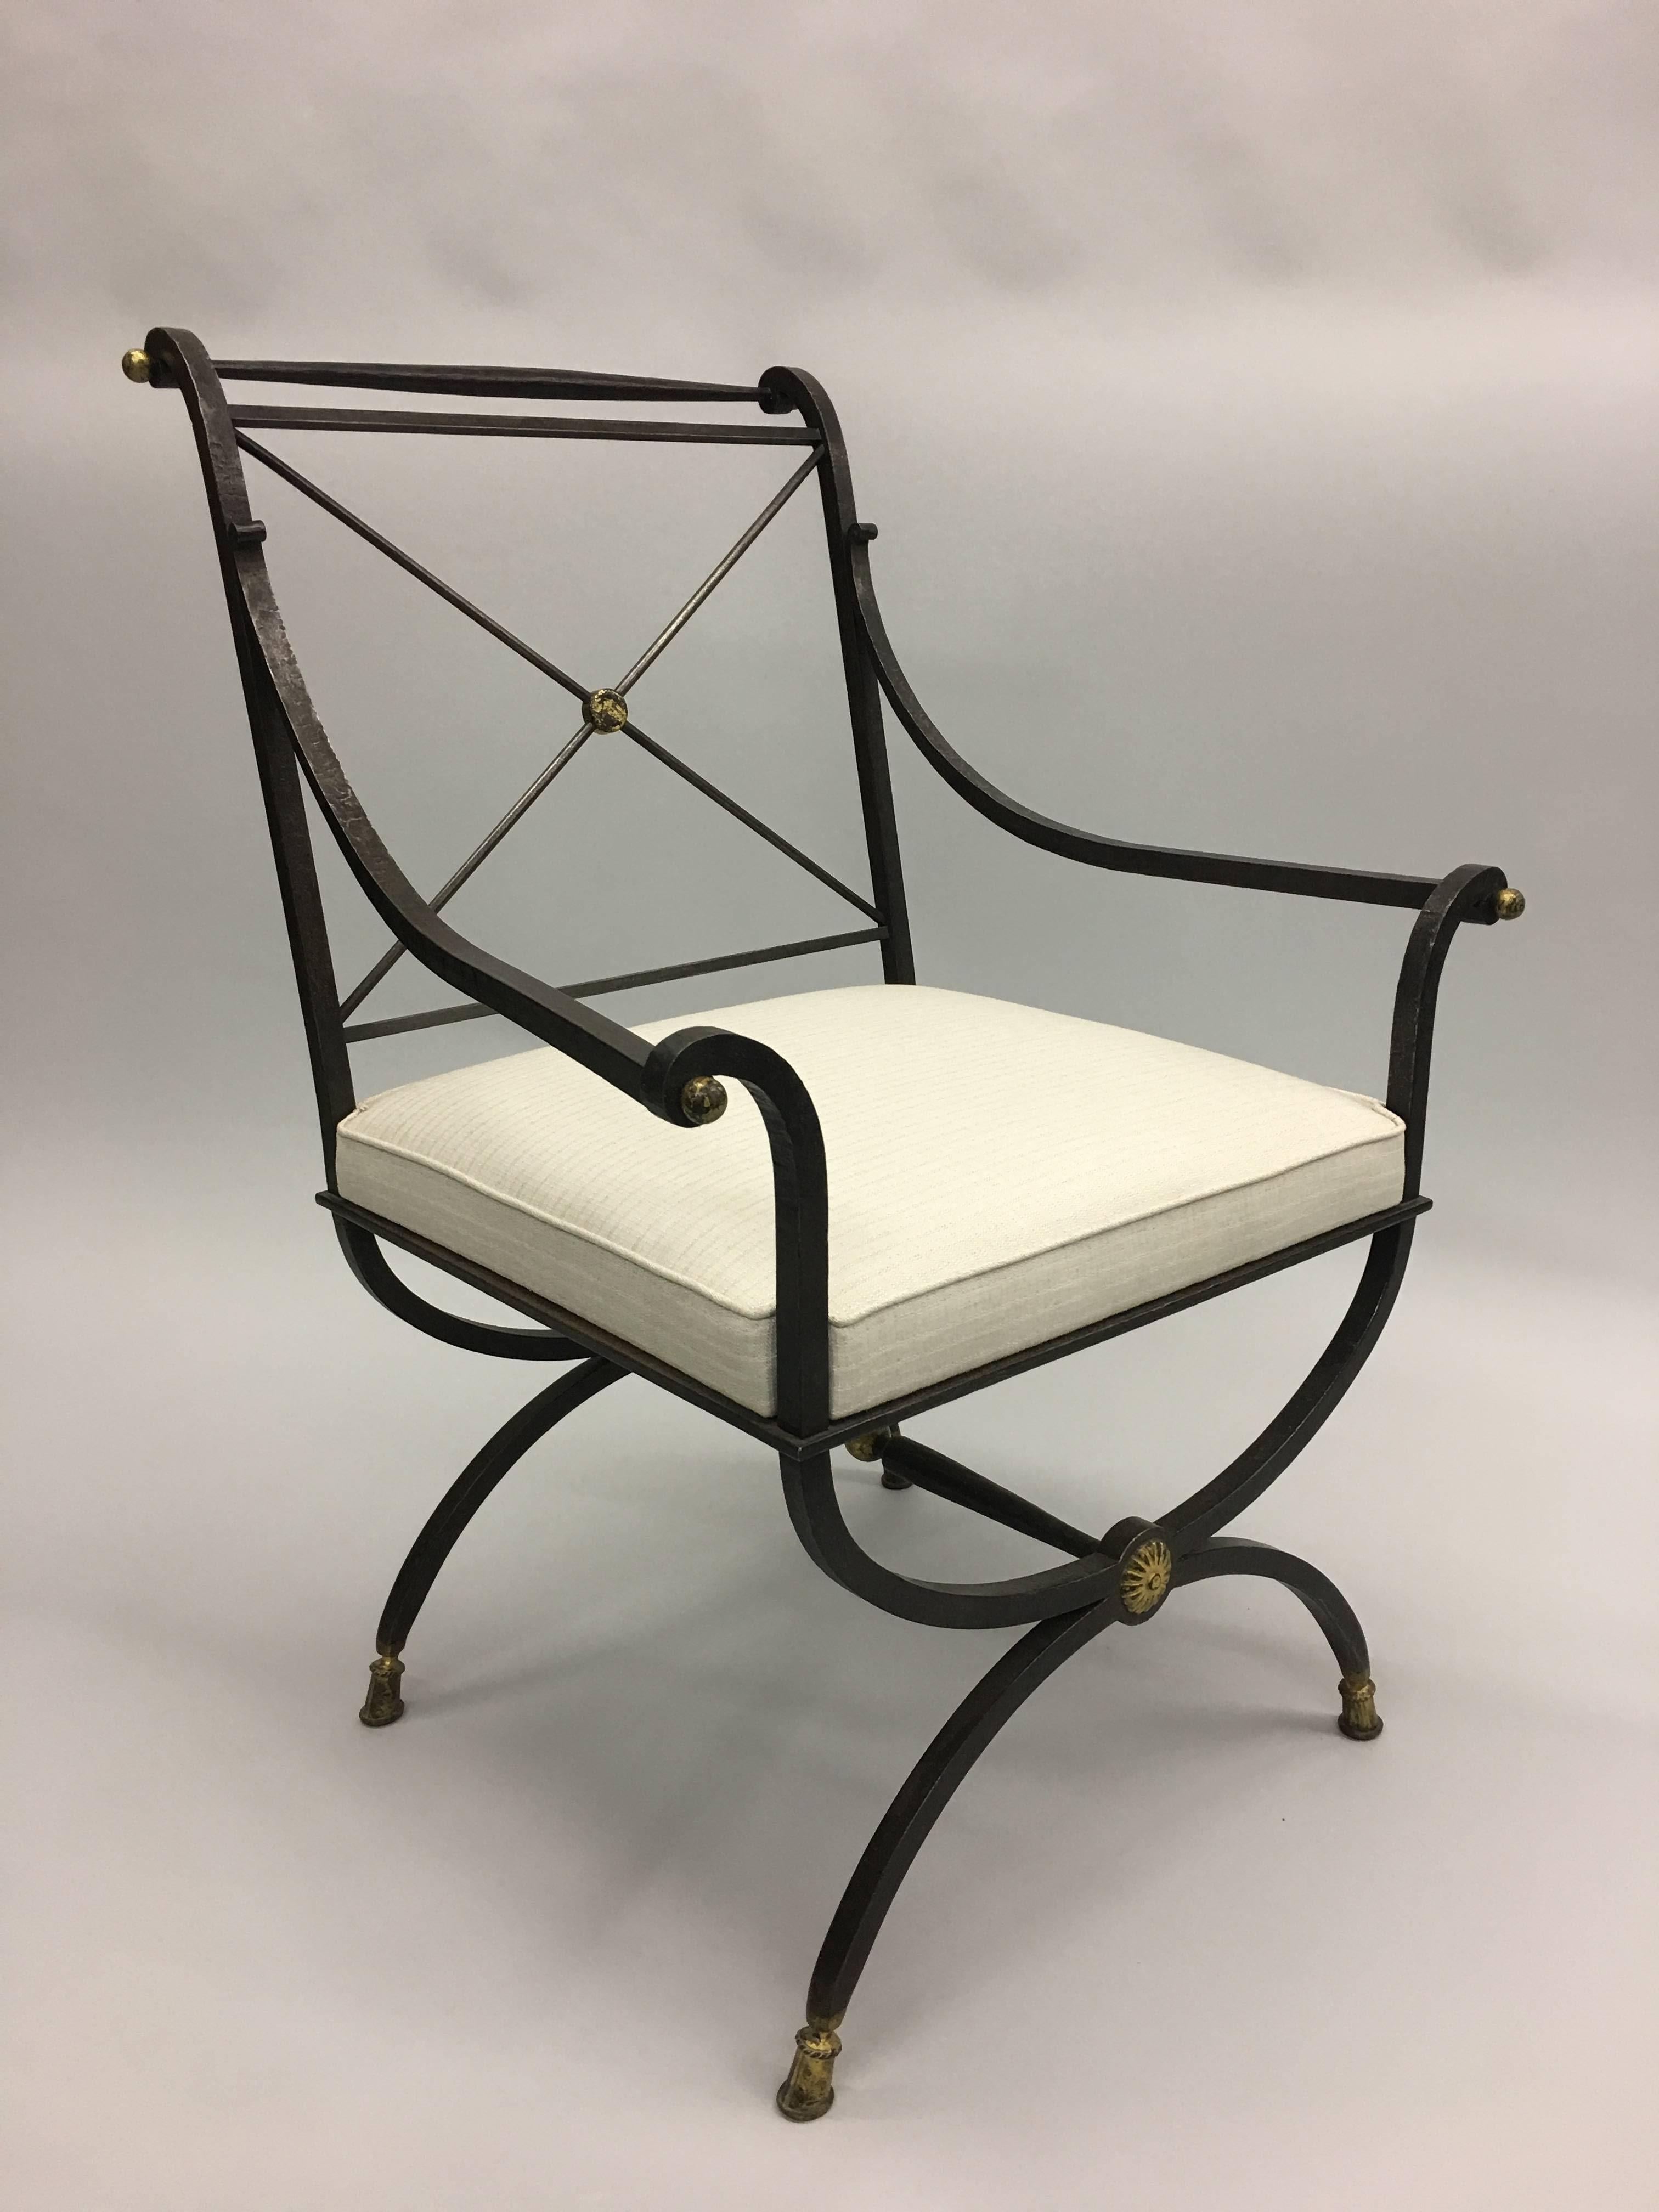 Elegant French modern neoclassical form hand-hammered wrought iron chair for desk, vanity or lounge by Gilbert Poillerat with the seat structure from a design by Andre Arbus.

The chair features a Classic Curile form (rounded X-form) leg